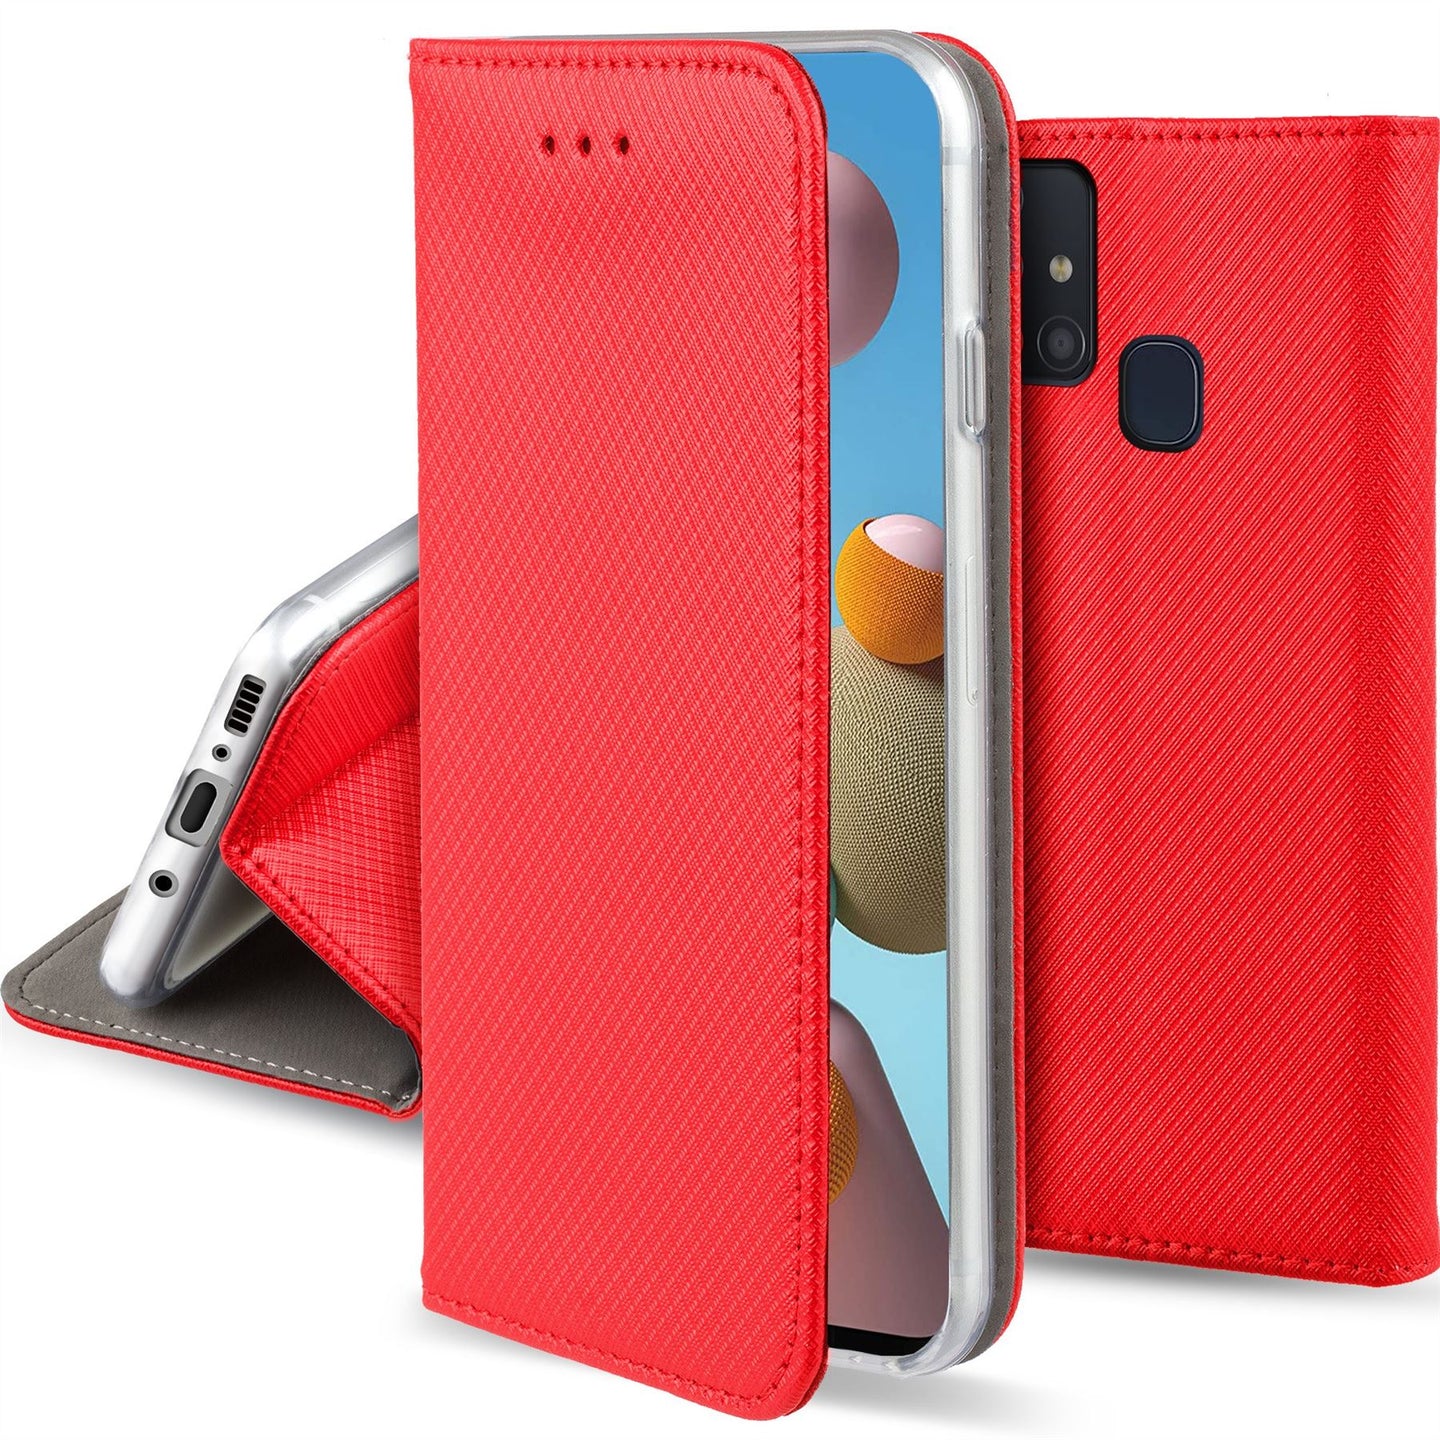 Moozy Case Flip Cover for Samsung A21s, Red - Smart Magnetic Flip Case with Card Holder and Stand